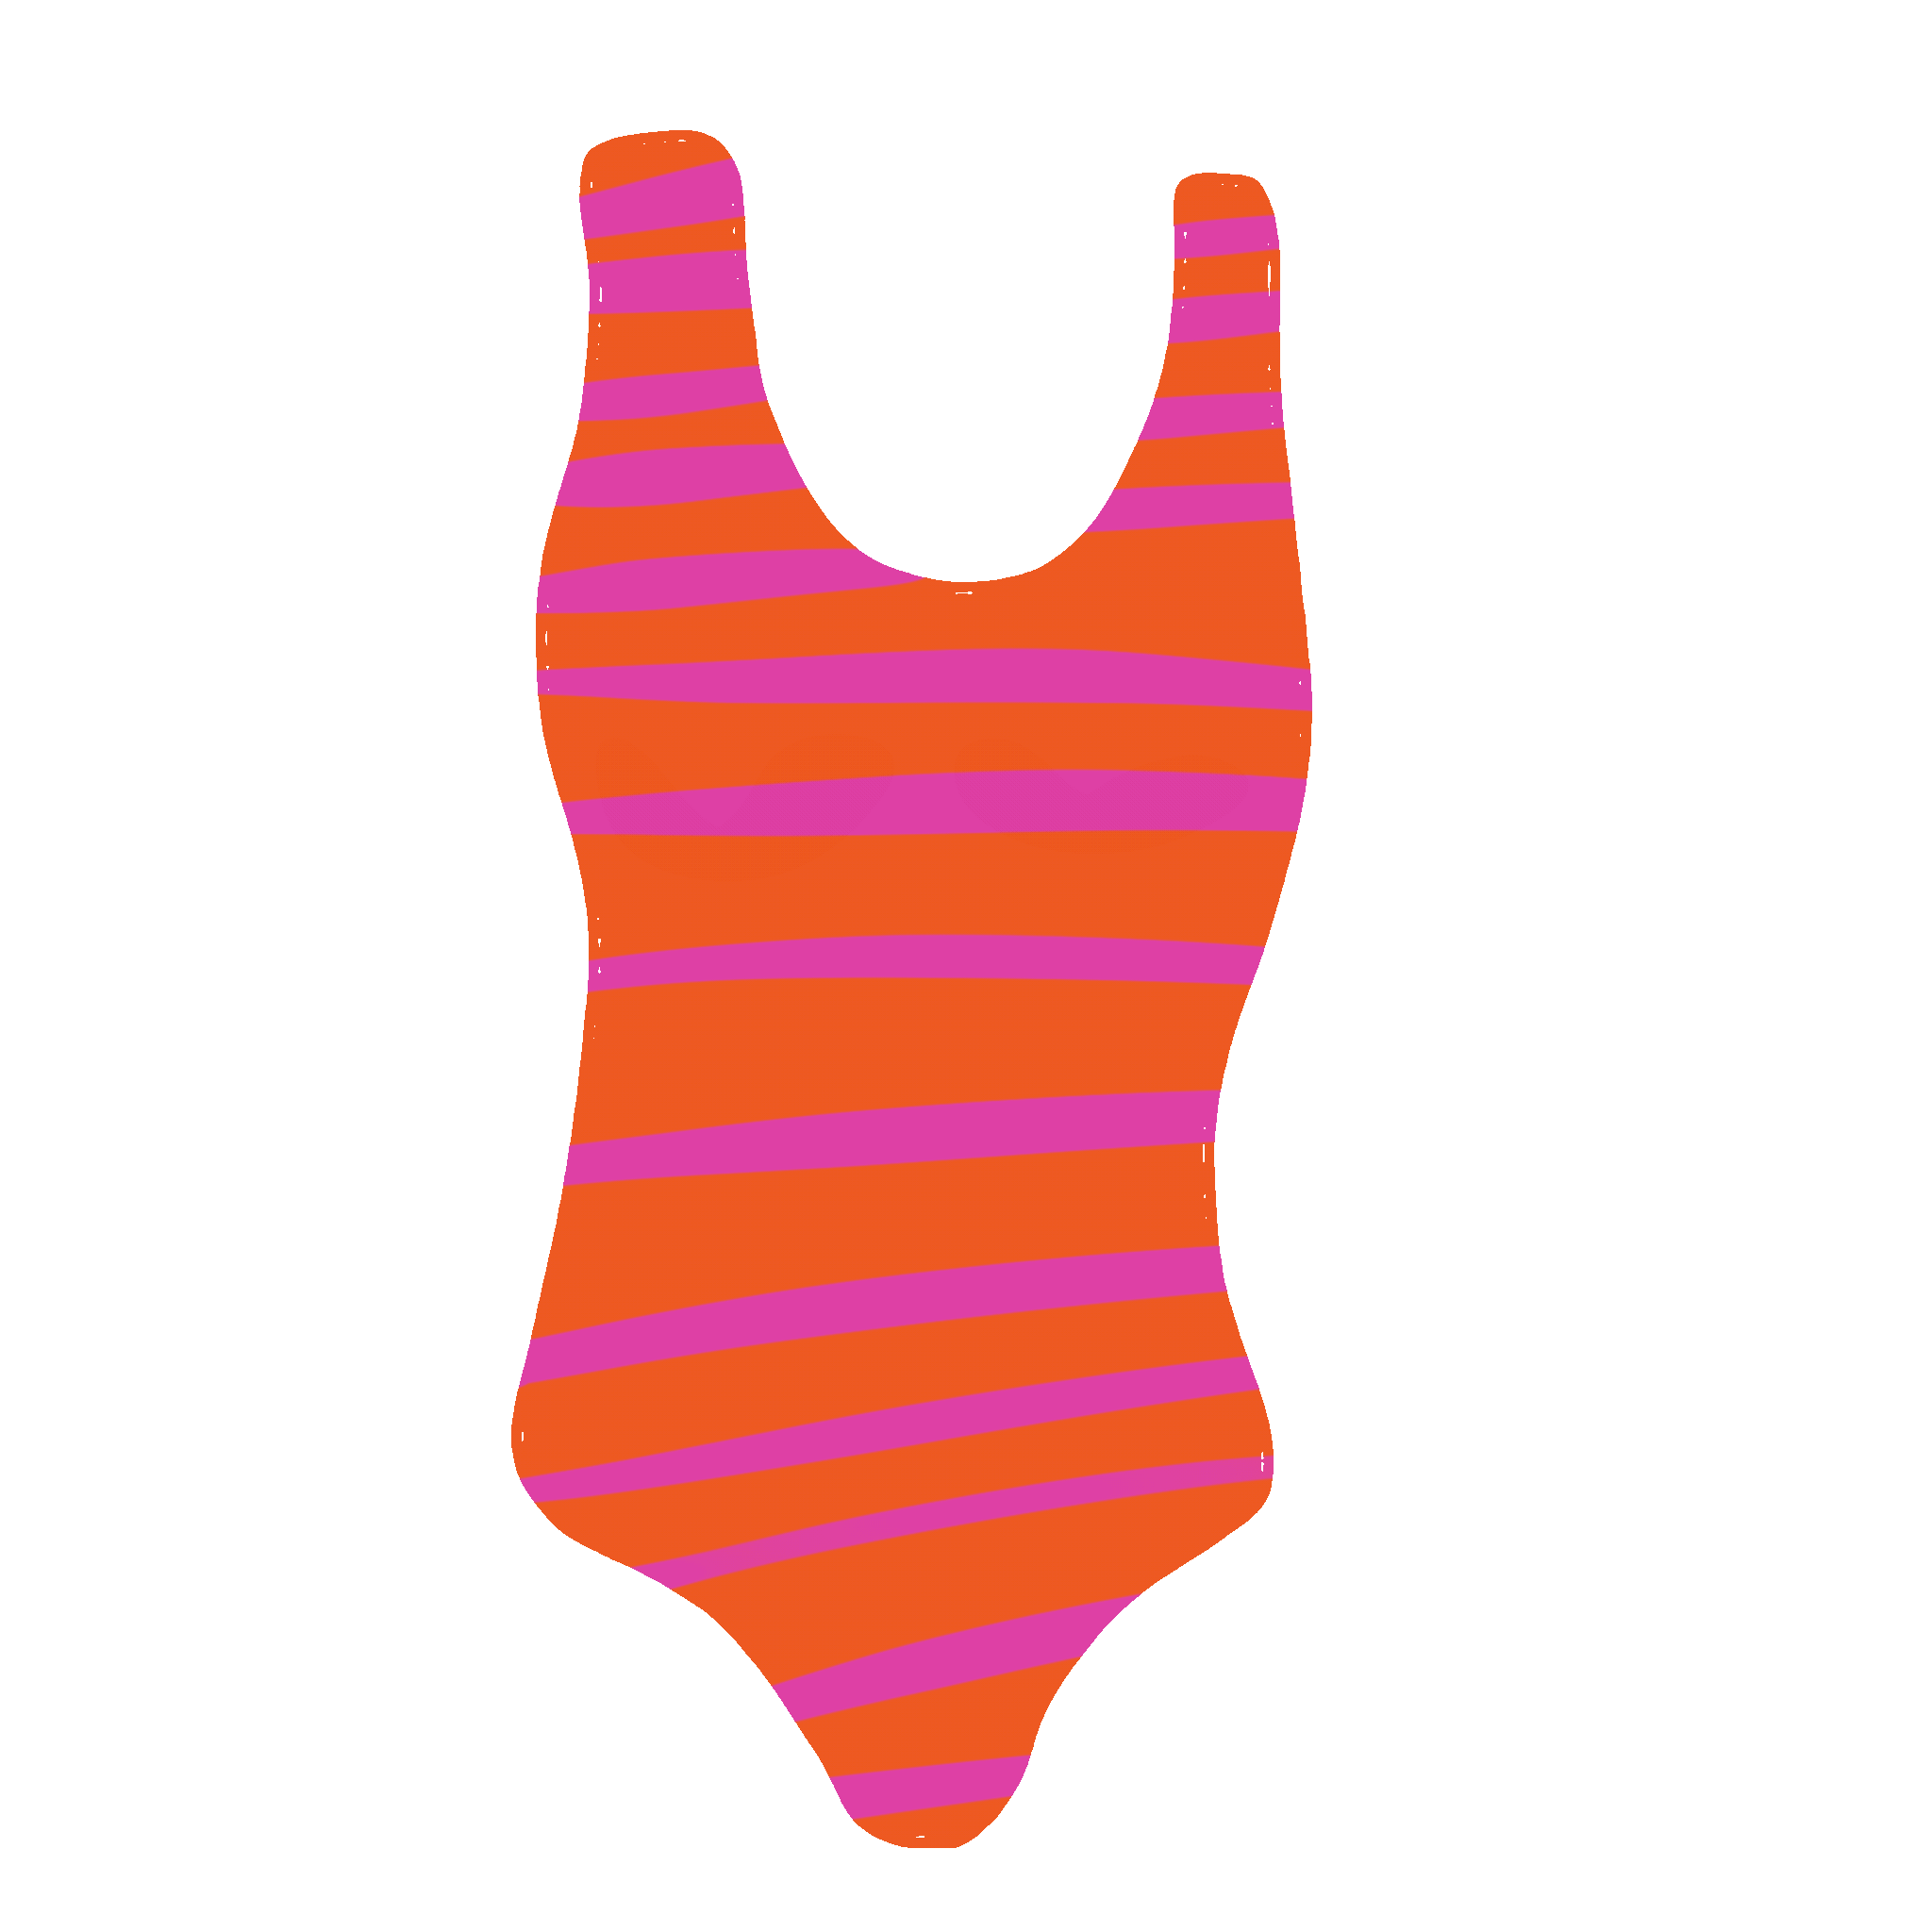 Bikini Swimsuit Sticker for iOS & Android | GIPHY